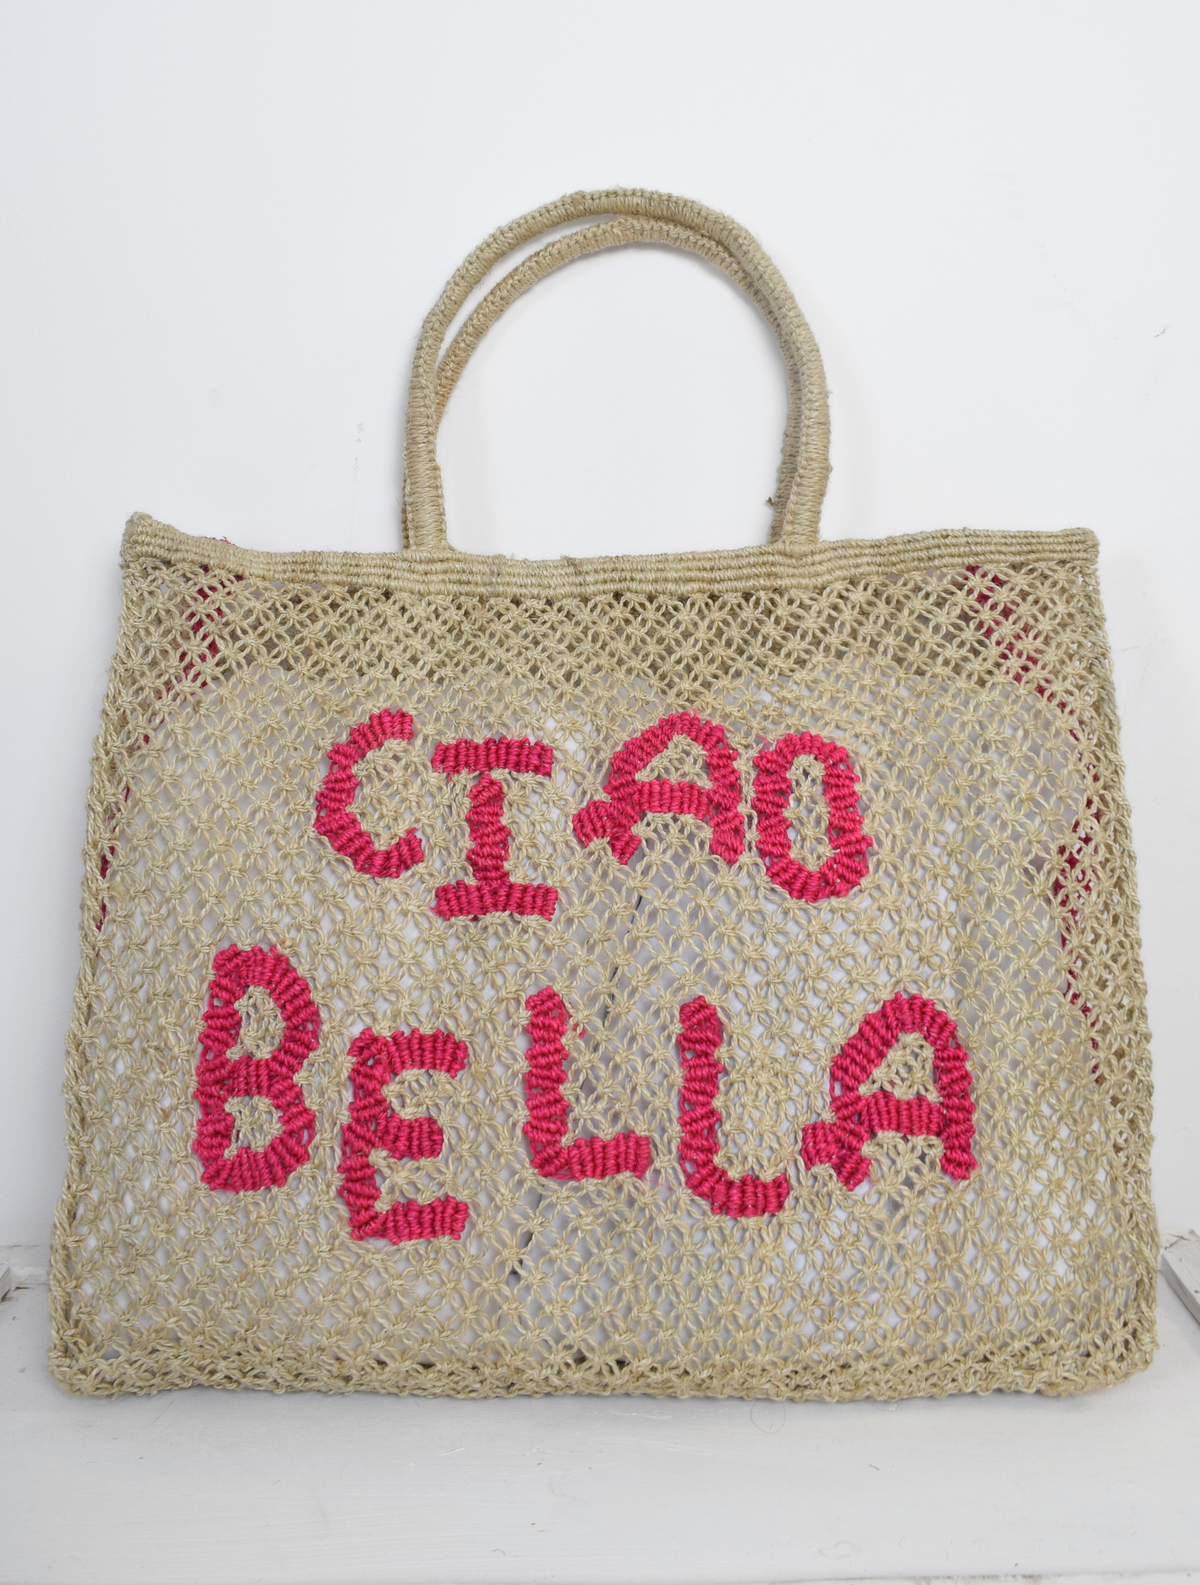 Woven Bag with pink writing saying Ciao Bella on the front 